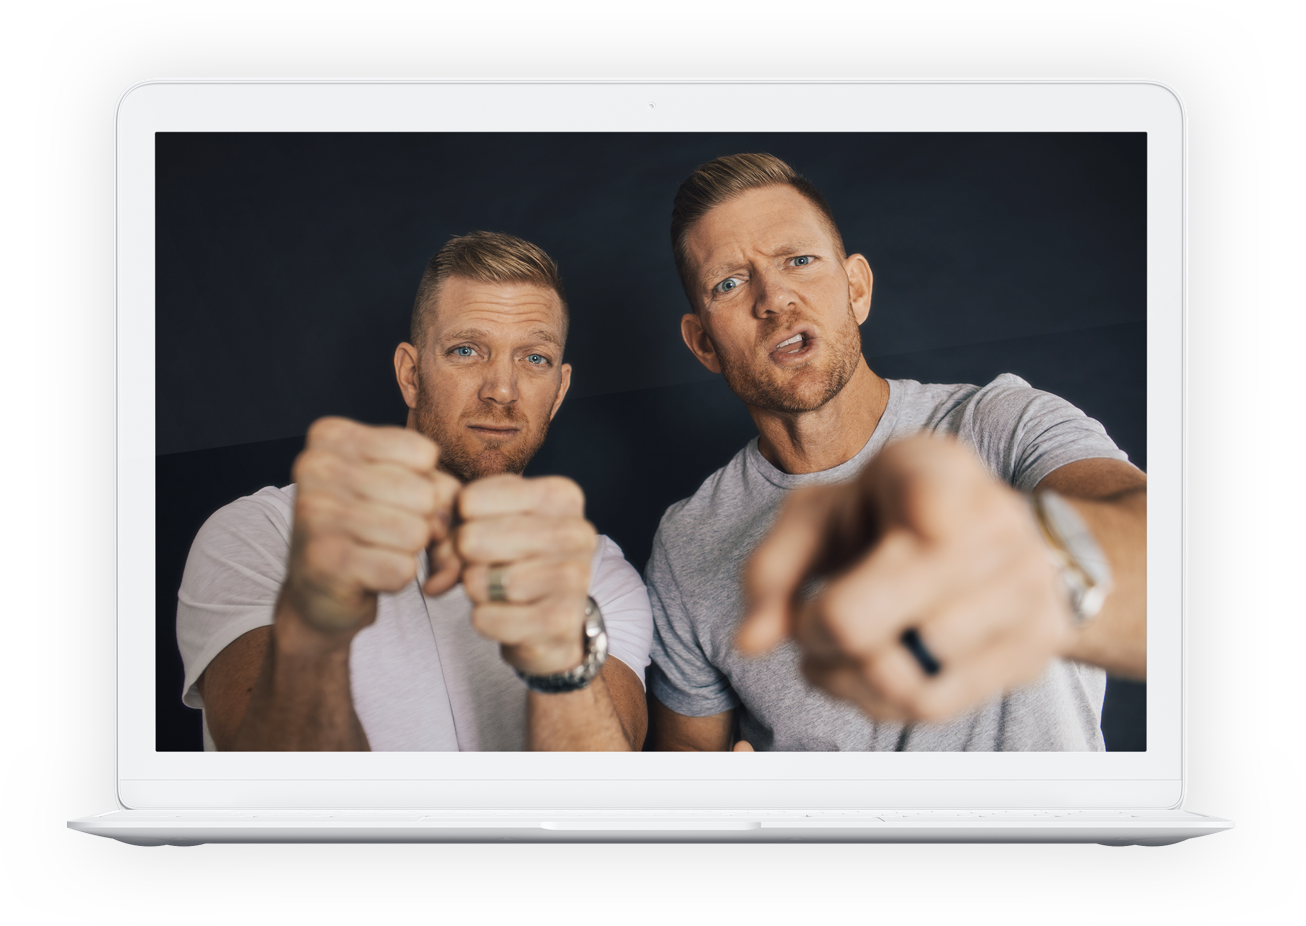 Benham Brothers: We’re joining LifeSiteNews on the frontlines of the culture war